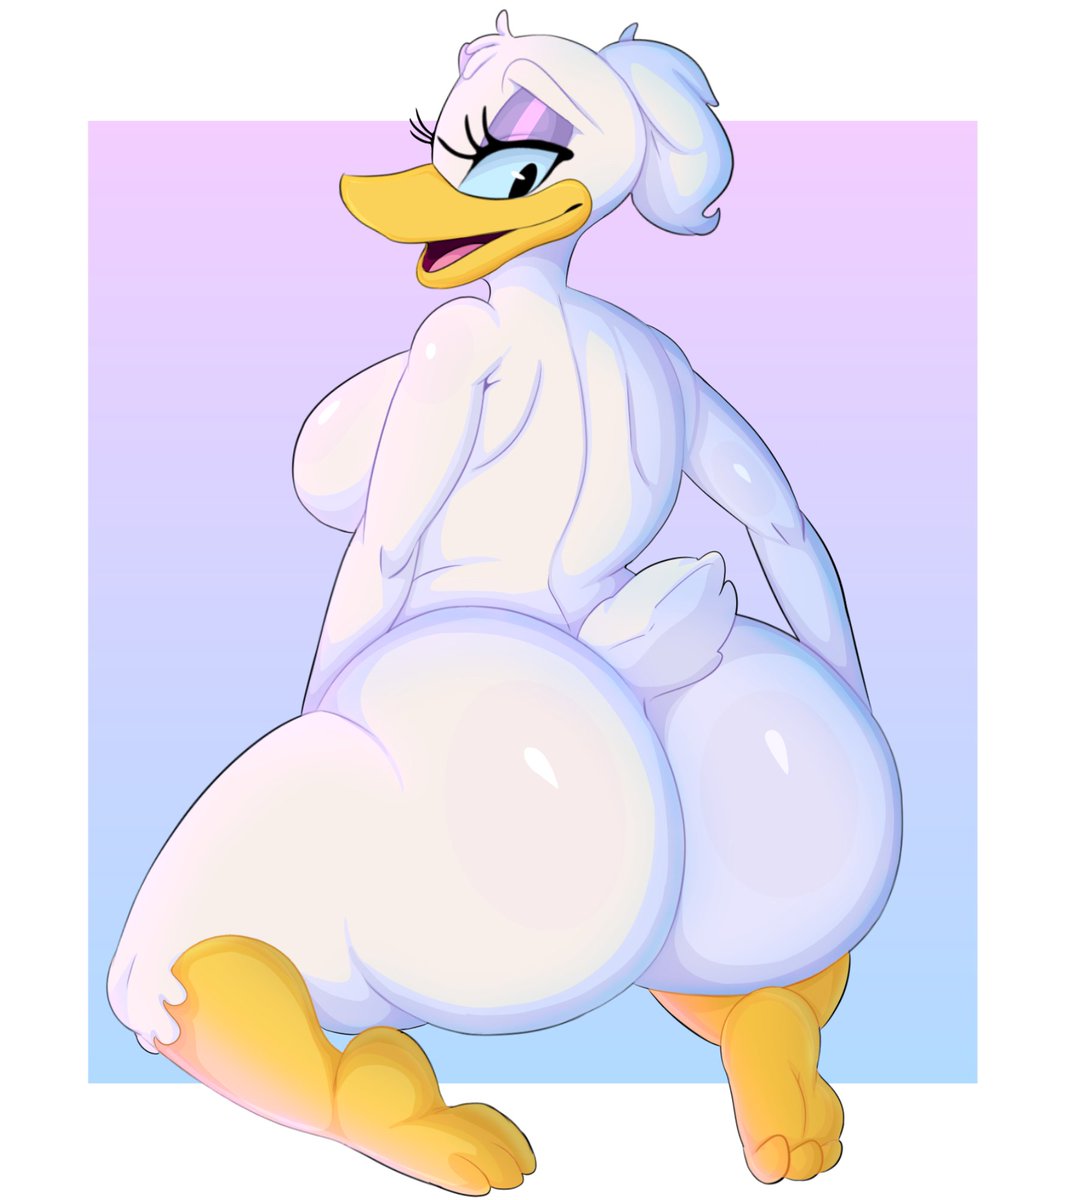 Daisy Duck Looking as gorgeous as ever! I'm becoming a fan of her now..so maybe more art of her in the future